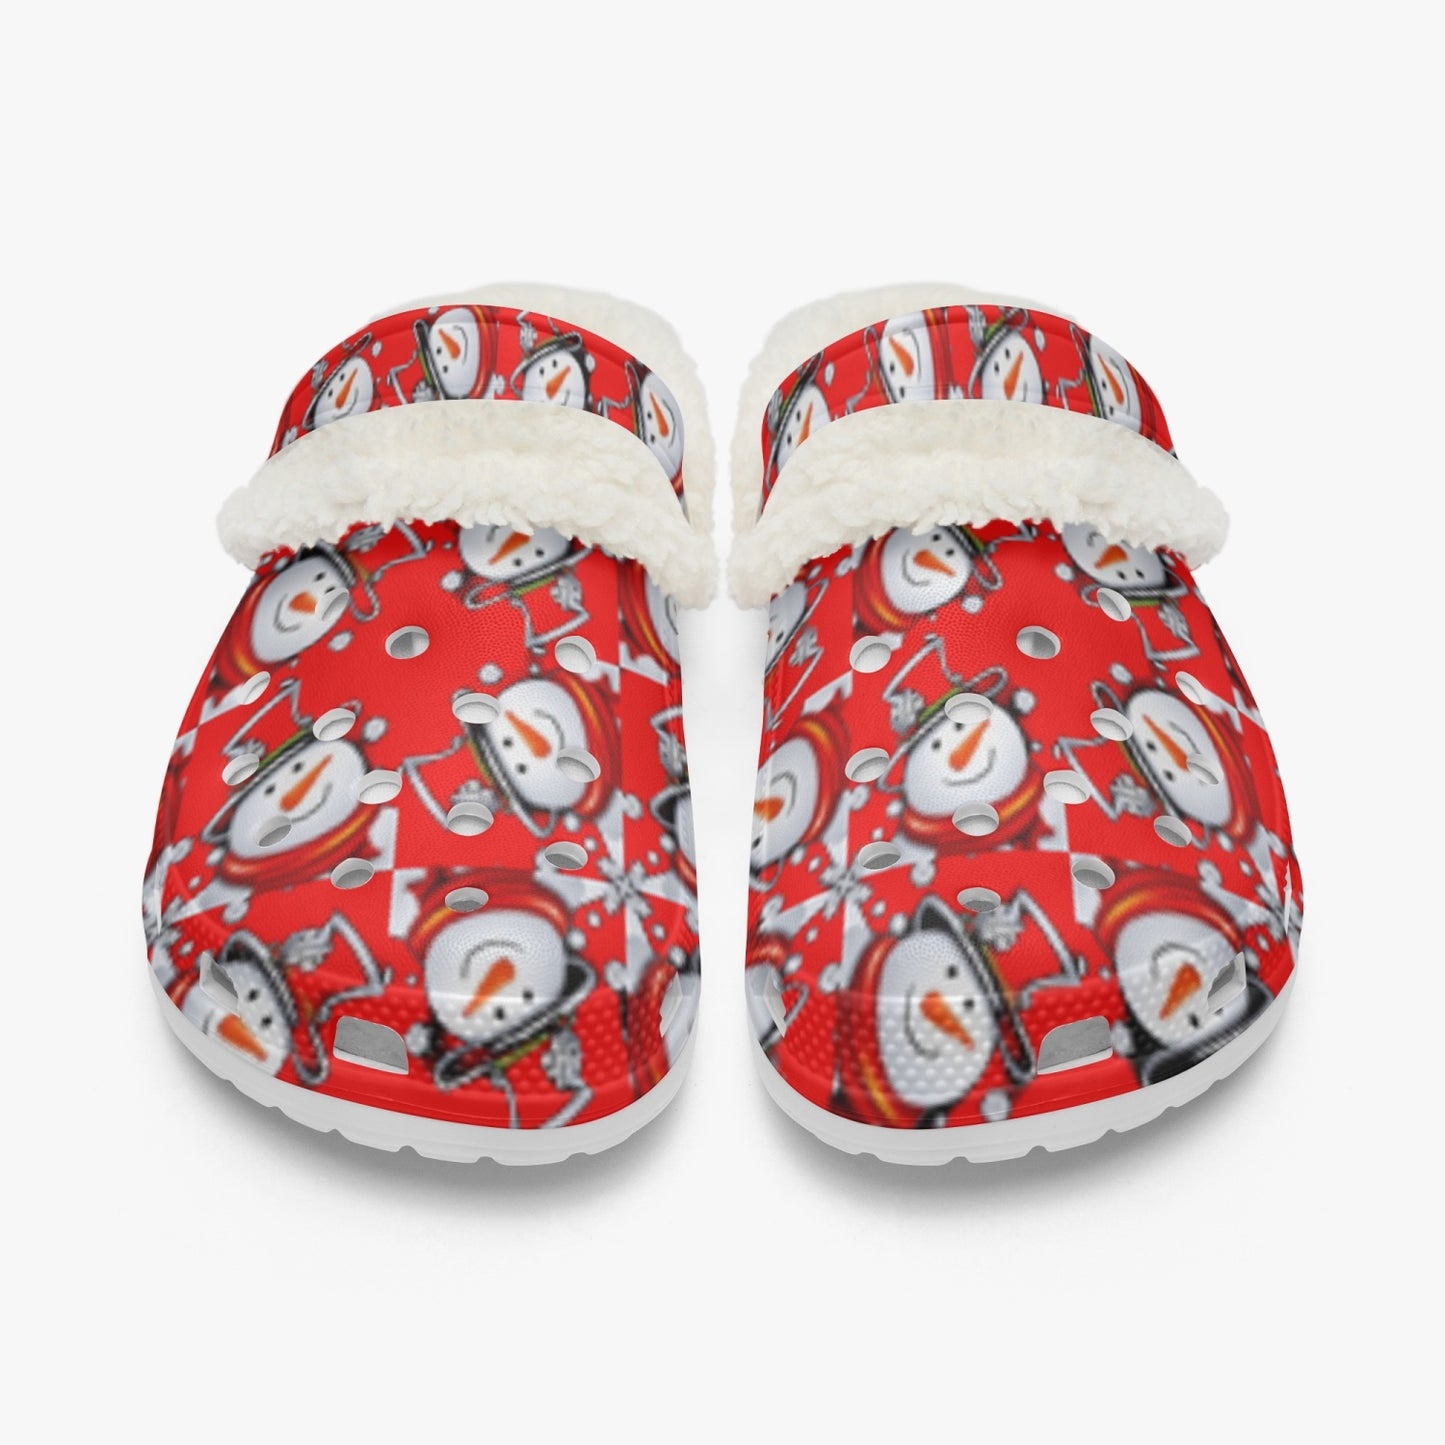 White Snow Man's Delight Fuzzy Lined Christmas Clogs - 2 colors - women's clogs at TFC&H Co.